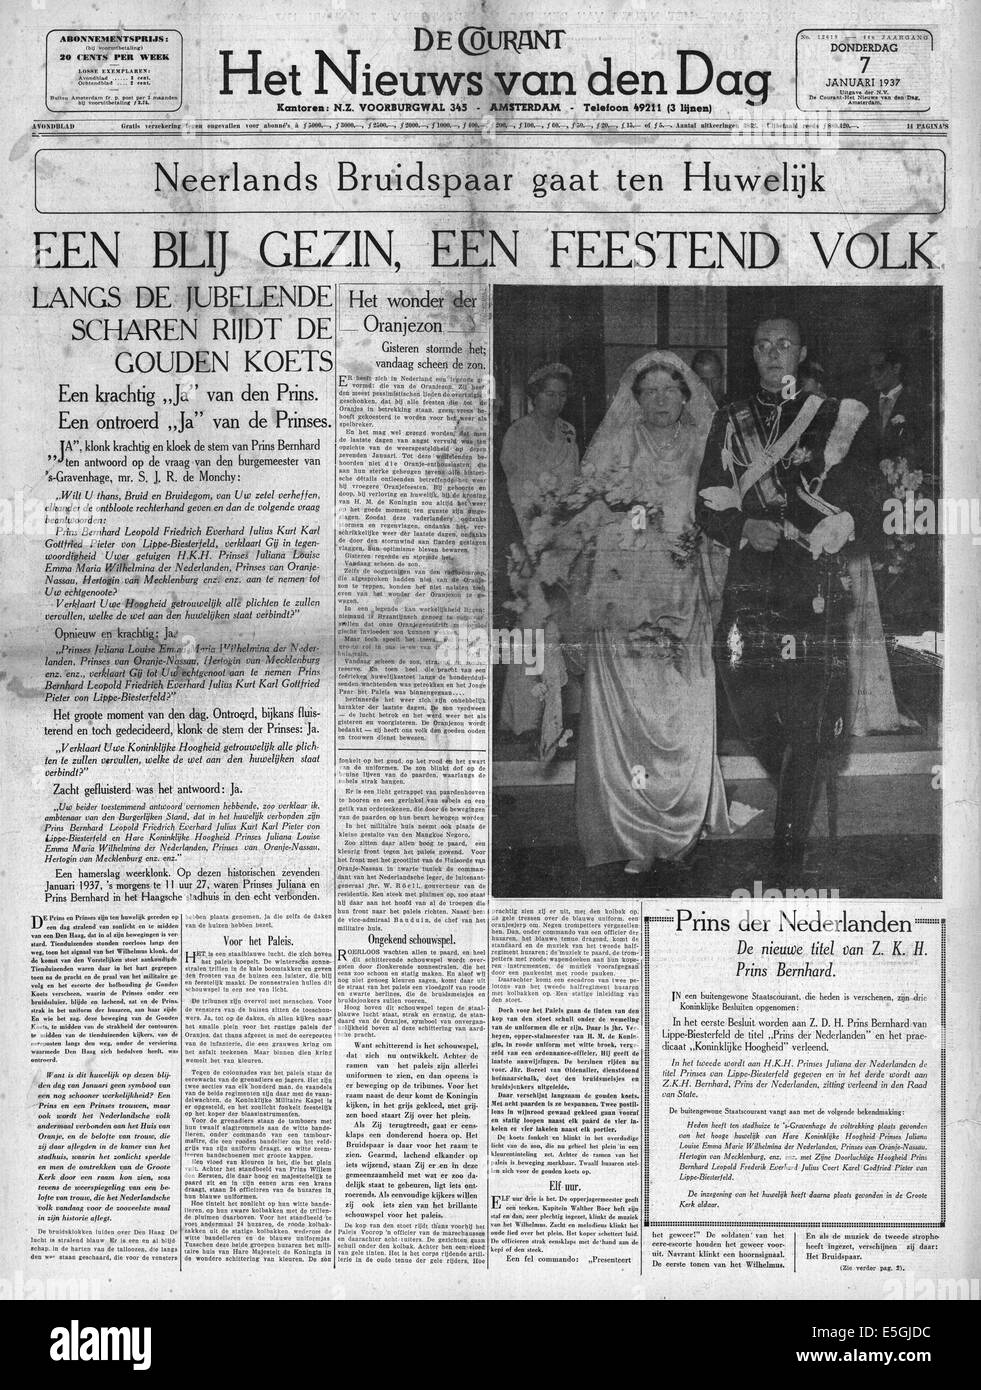 1937 De Courant (Holland) front page reporting the wedding of Princess Juliana of The Netherlands and Prince Bernhard in The Hague, The Netherlands Stock Photo